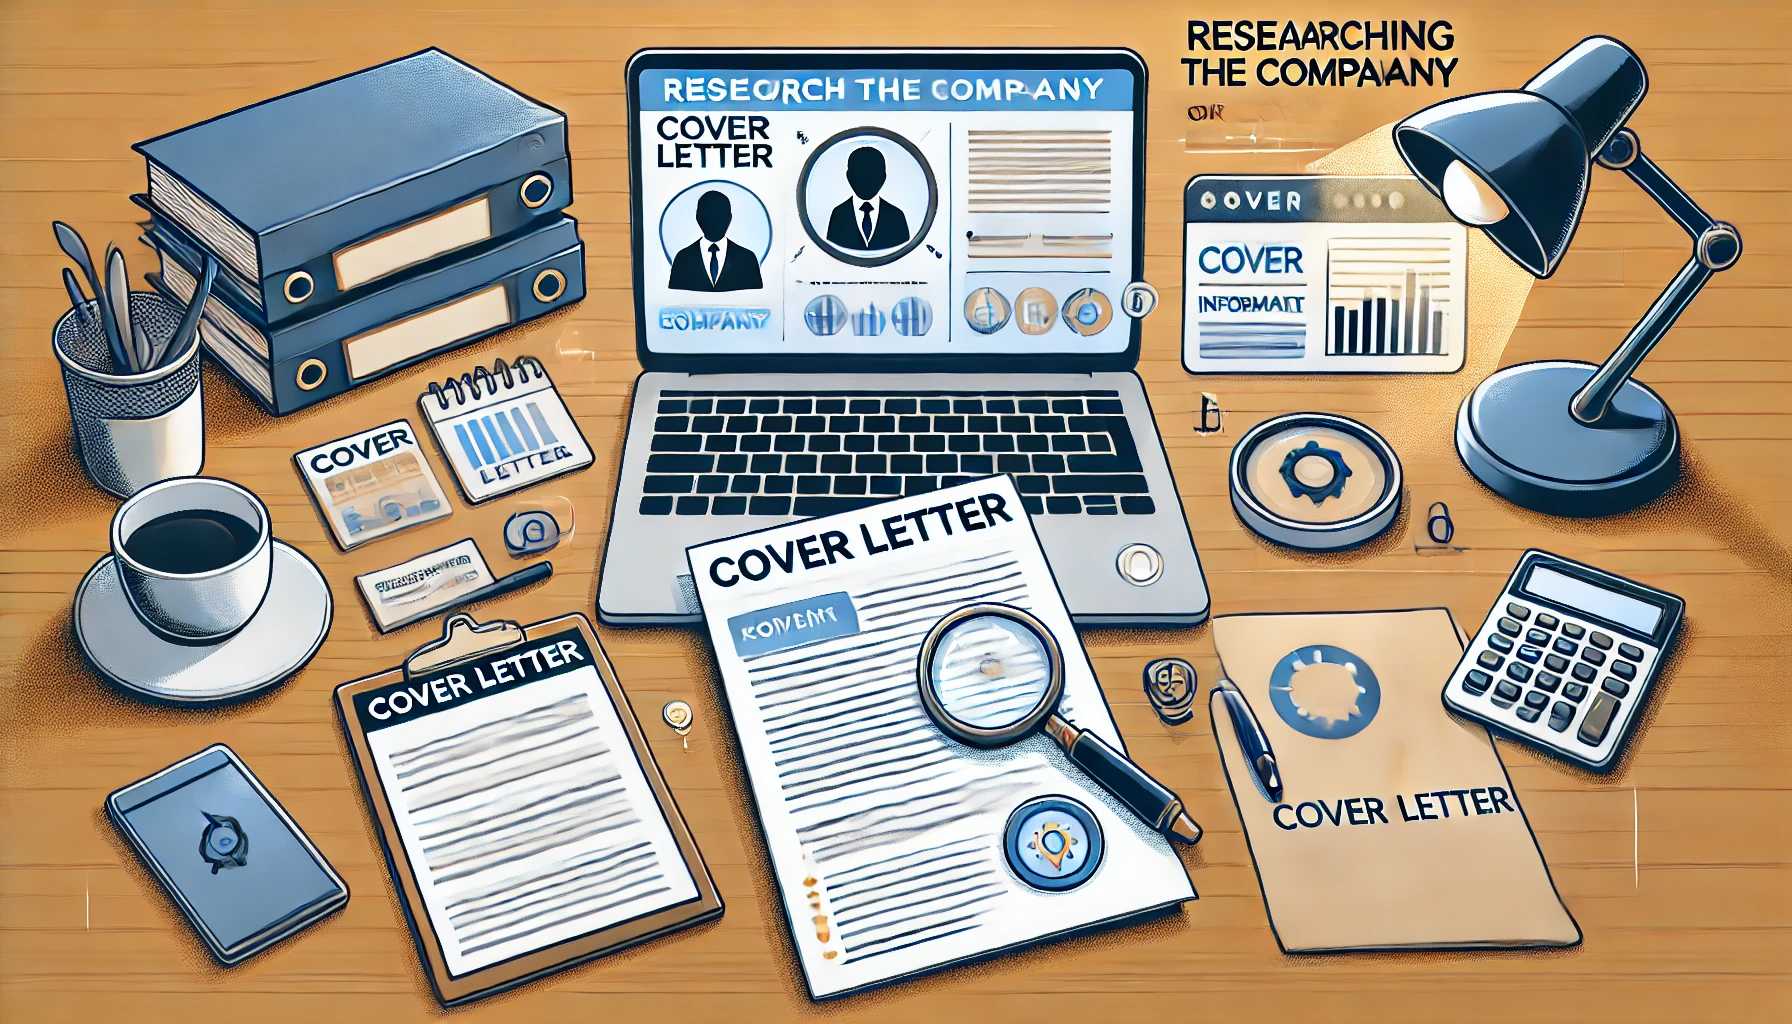 The Importance of Researching the Company for Your Cover Letter